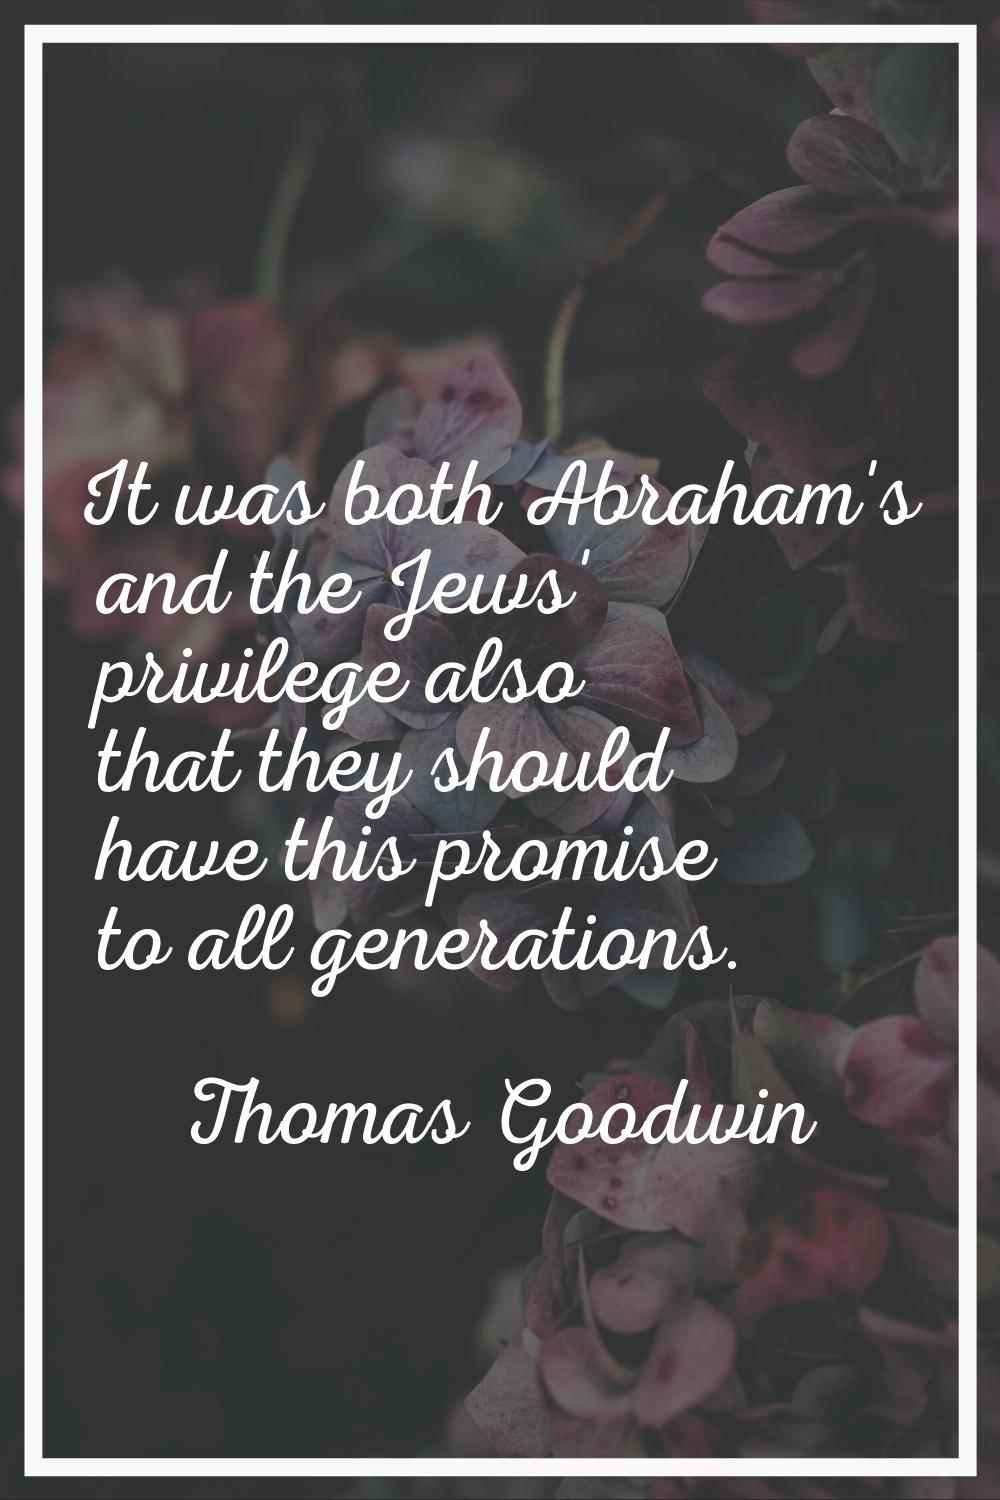 It was both Abraham's and the Jews' privilege also that they should have this promise to all genera